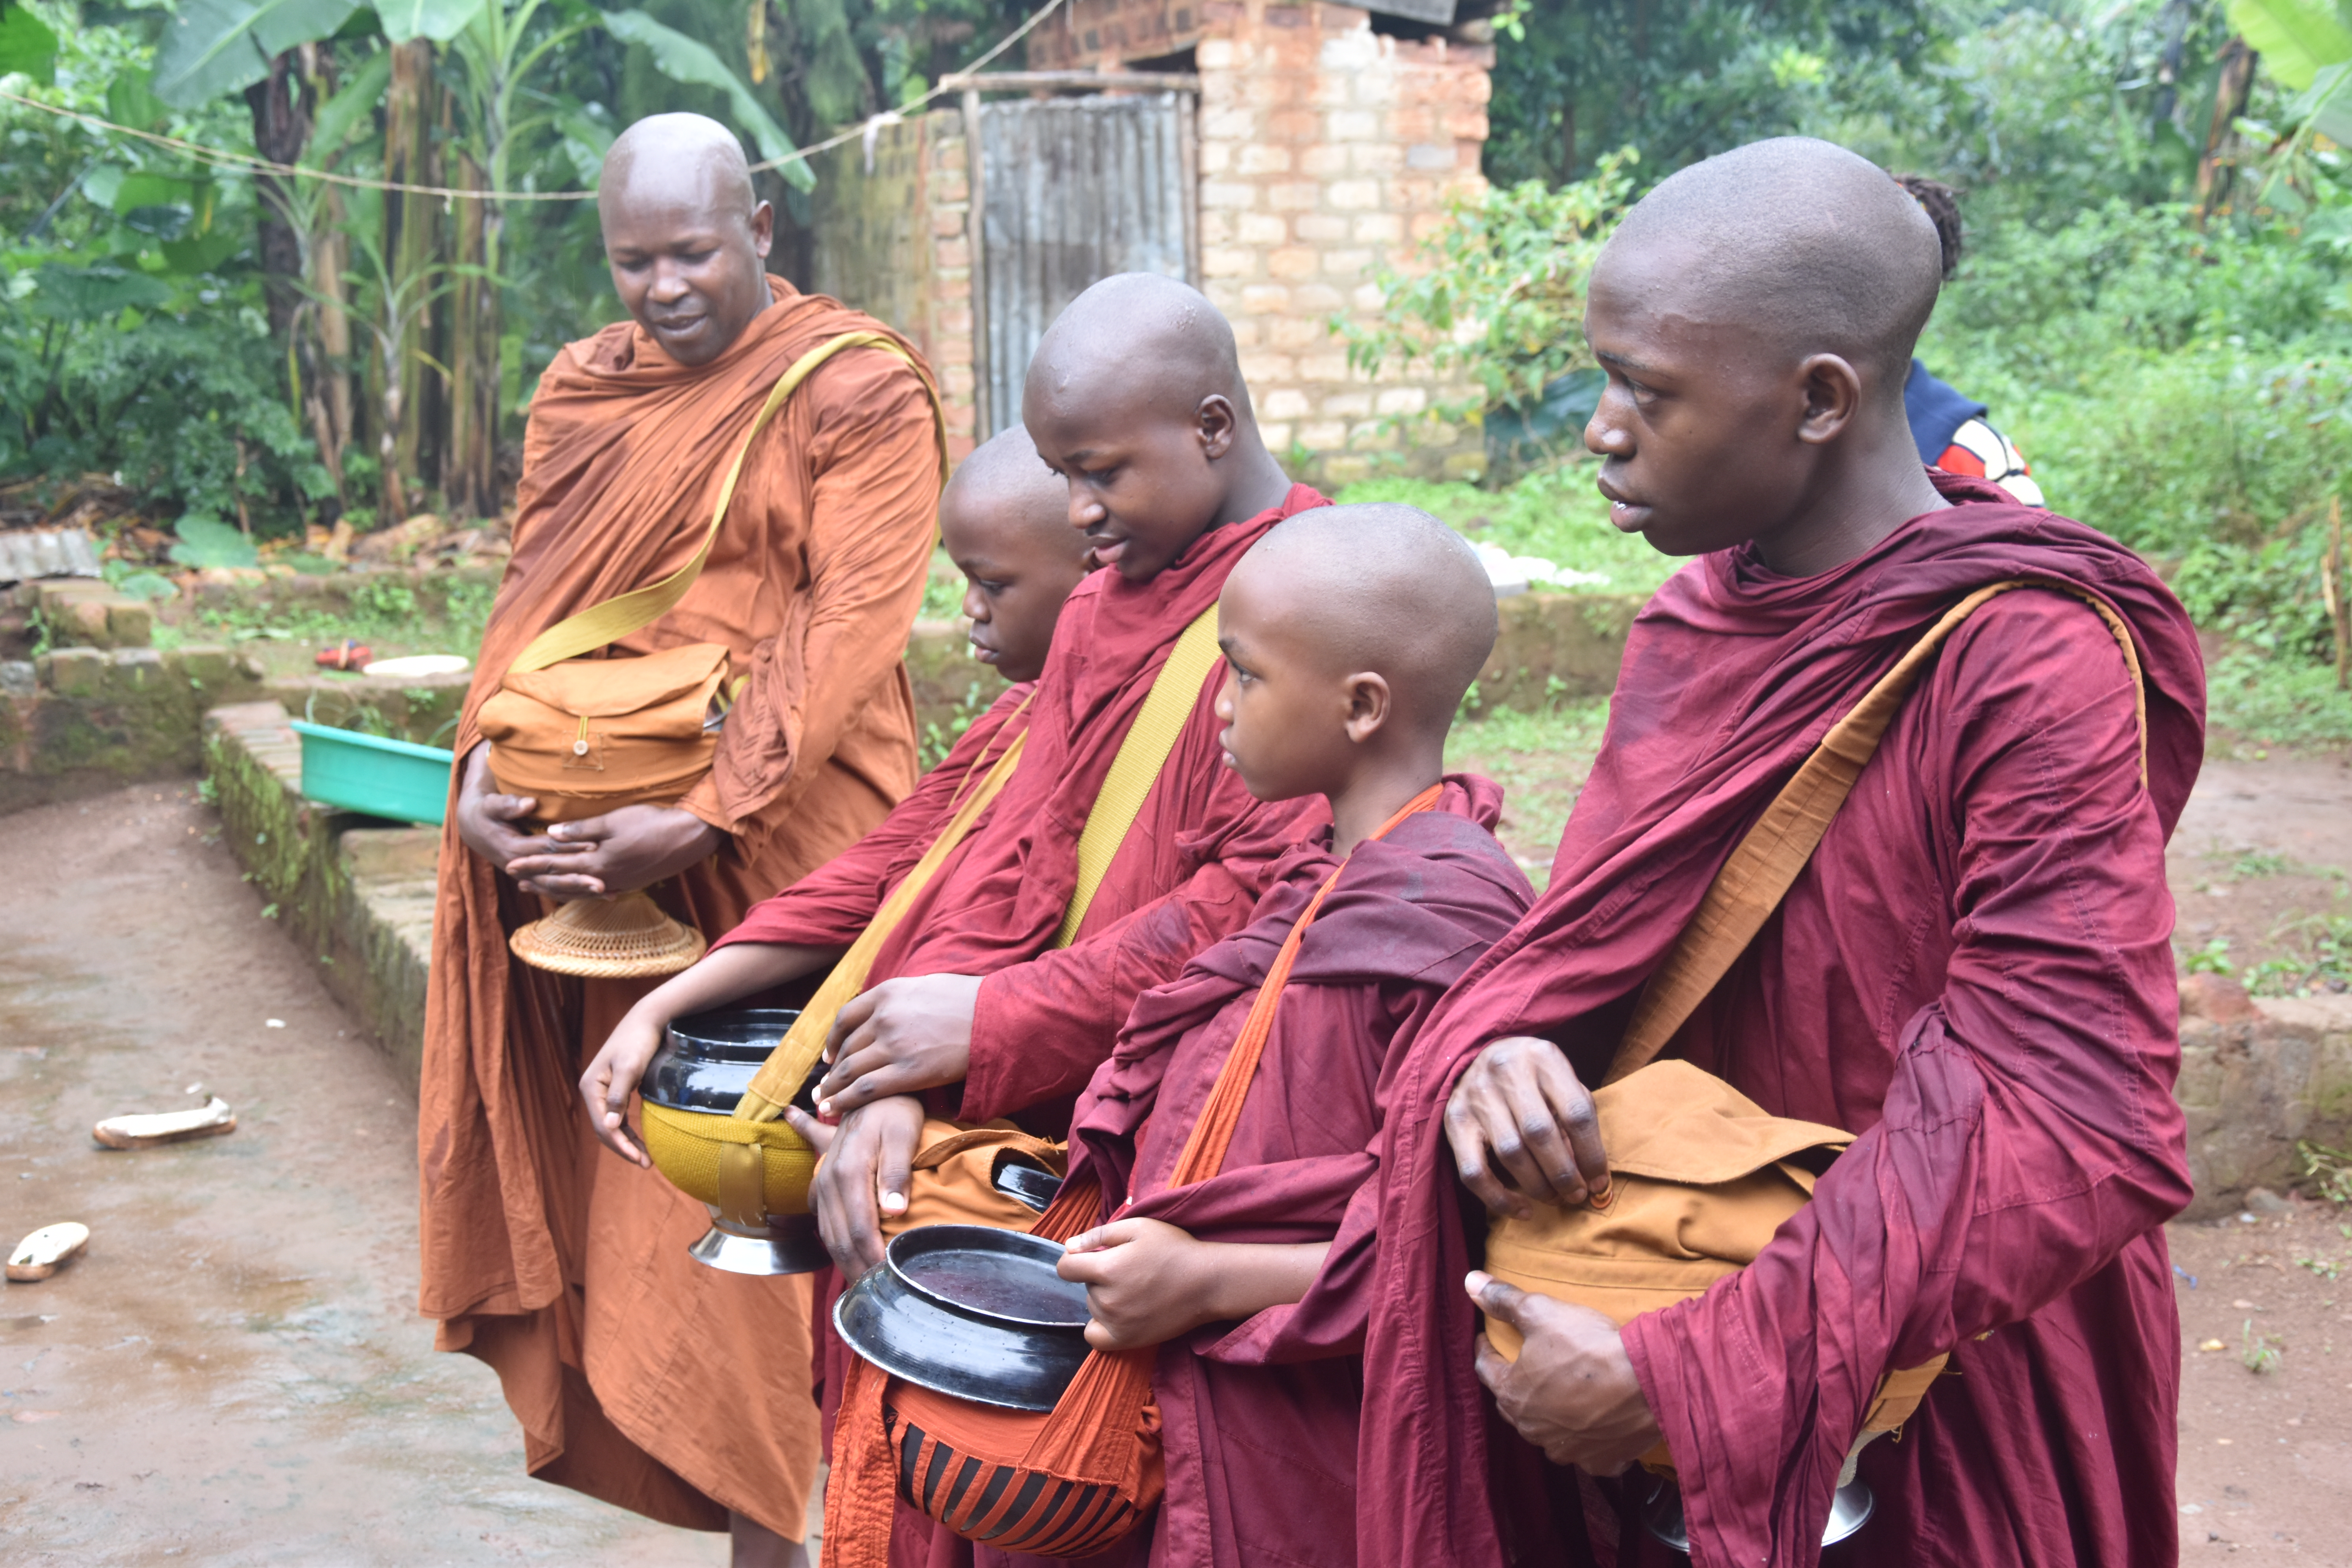 Local People Practice Alms-Giving